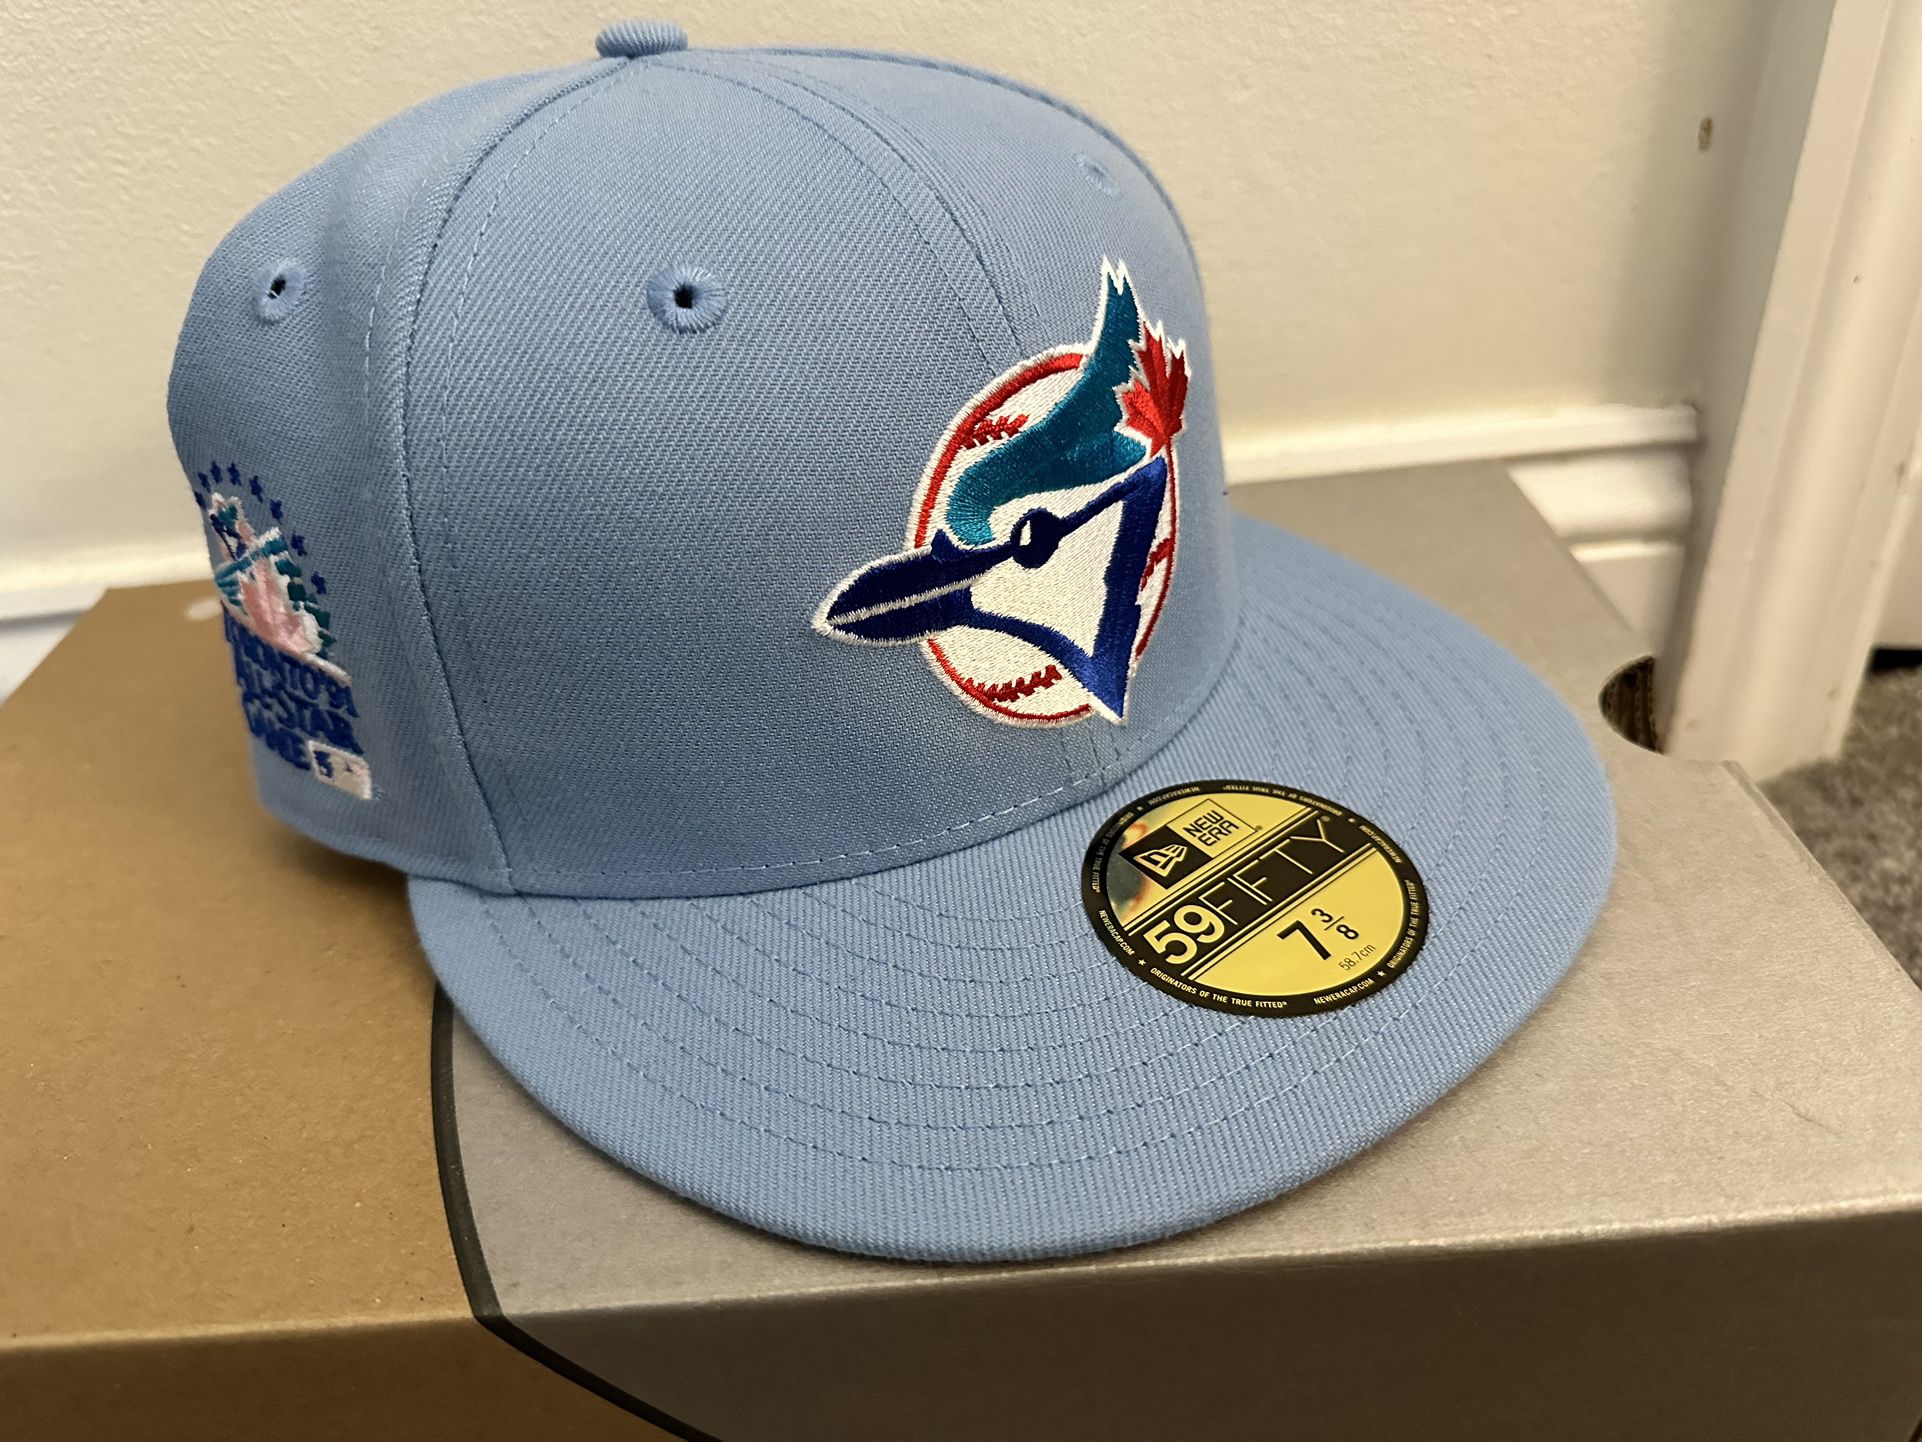 Blue Jays Cotton Candy Sz 7 3/8 Brand new pink brim for Sale in Yonkers, NY  - OfferUp